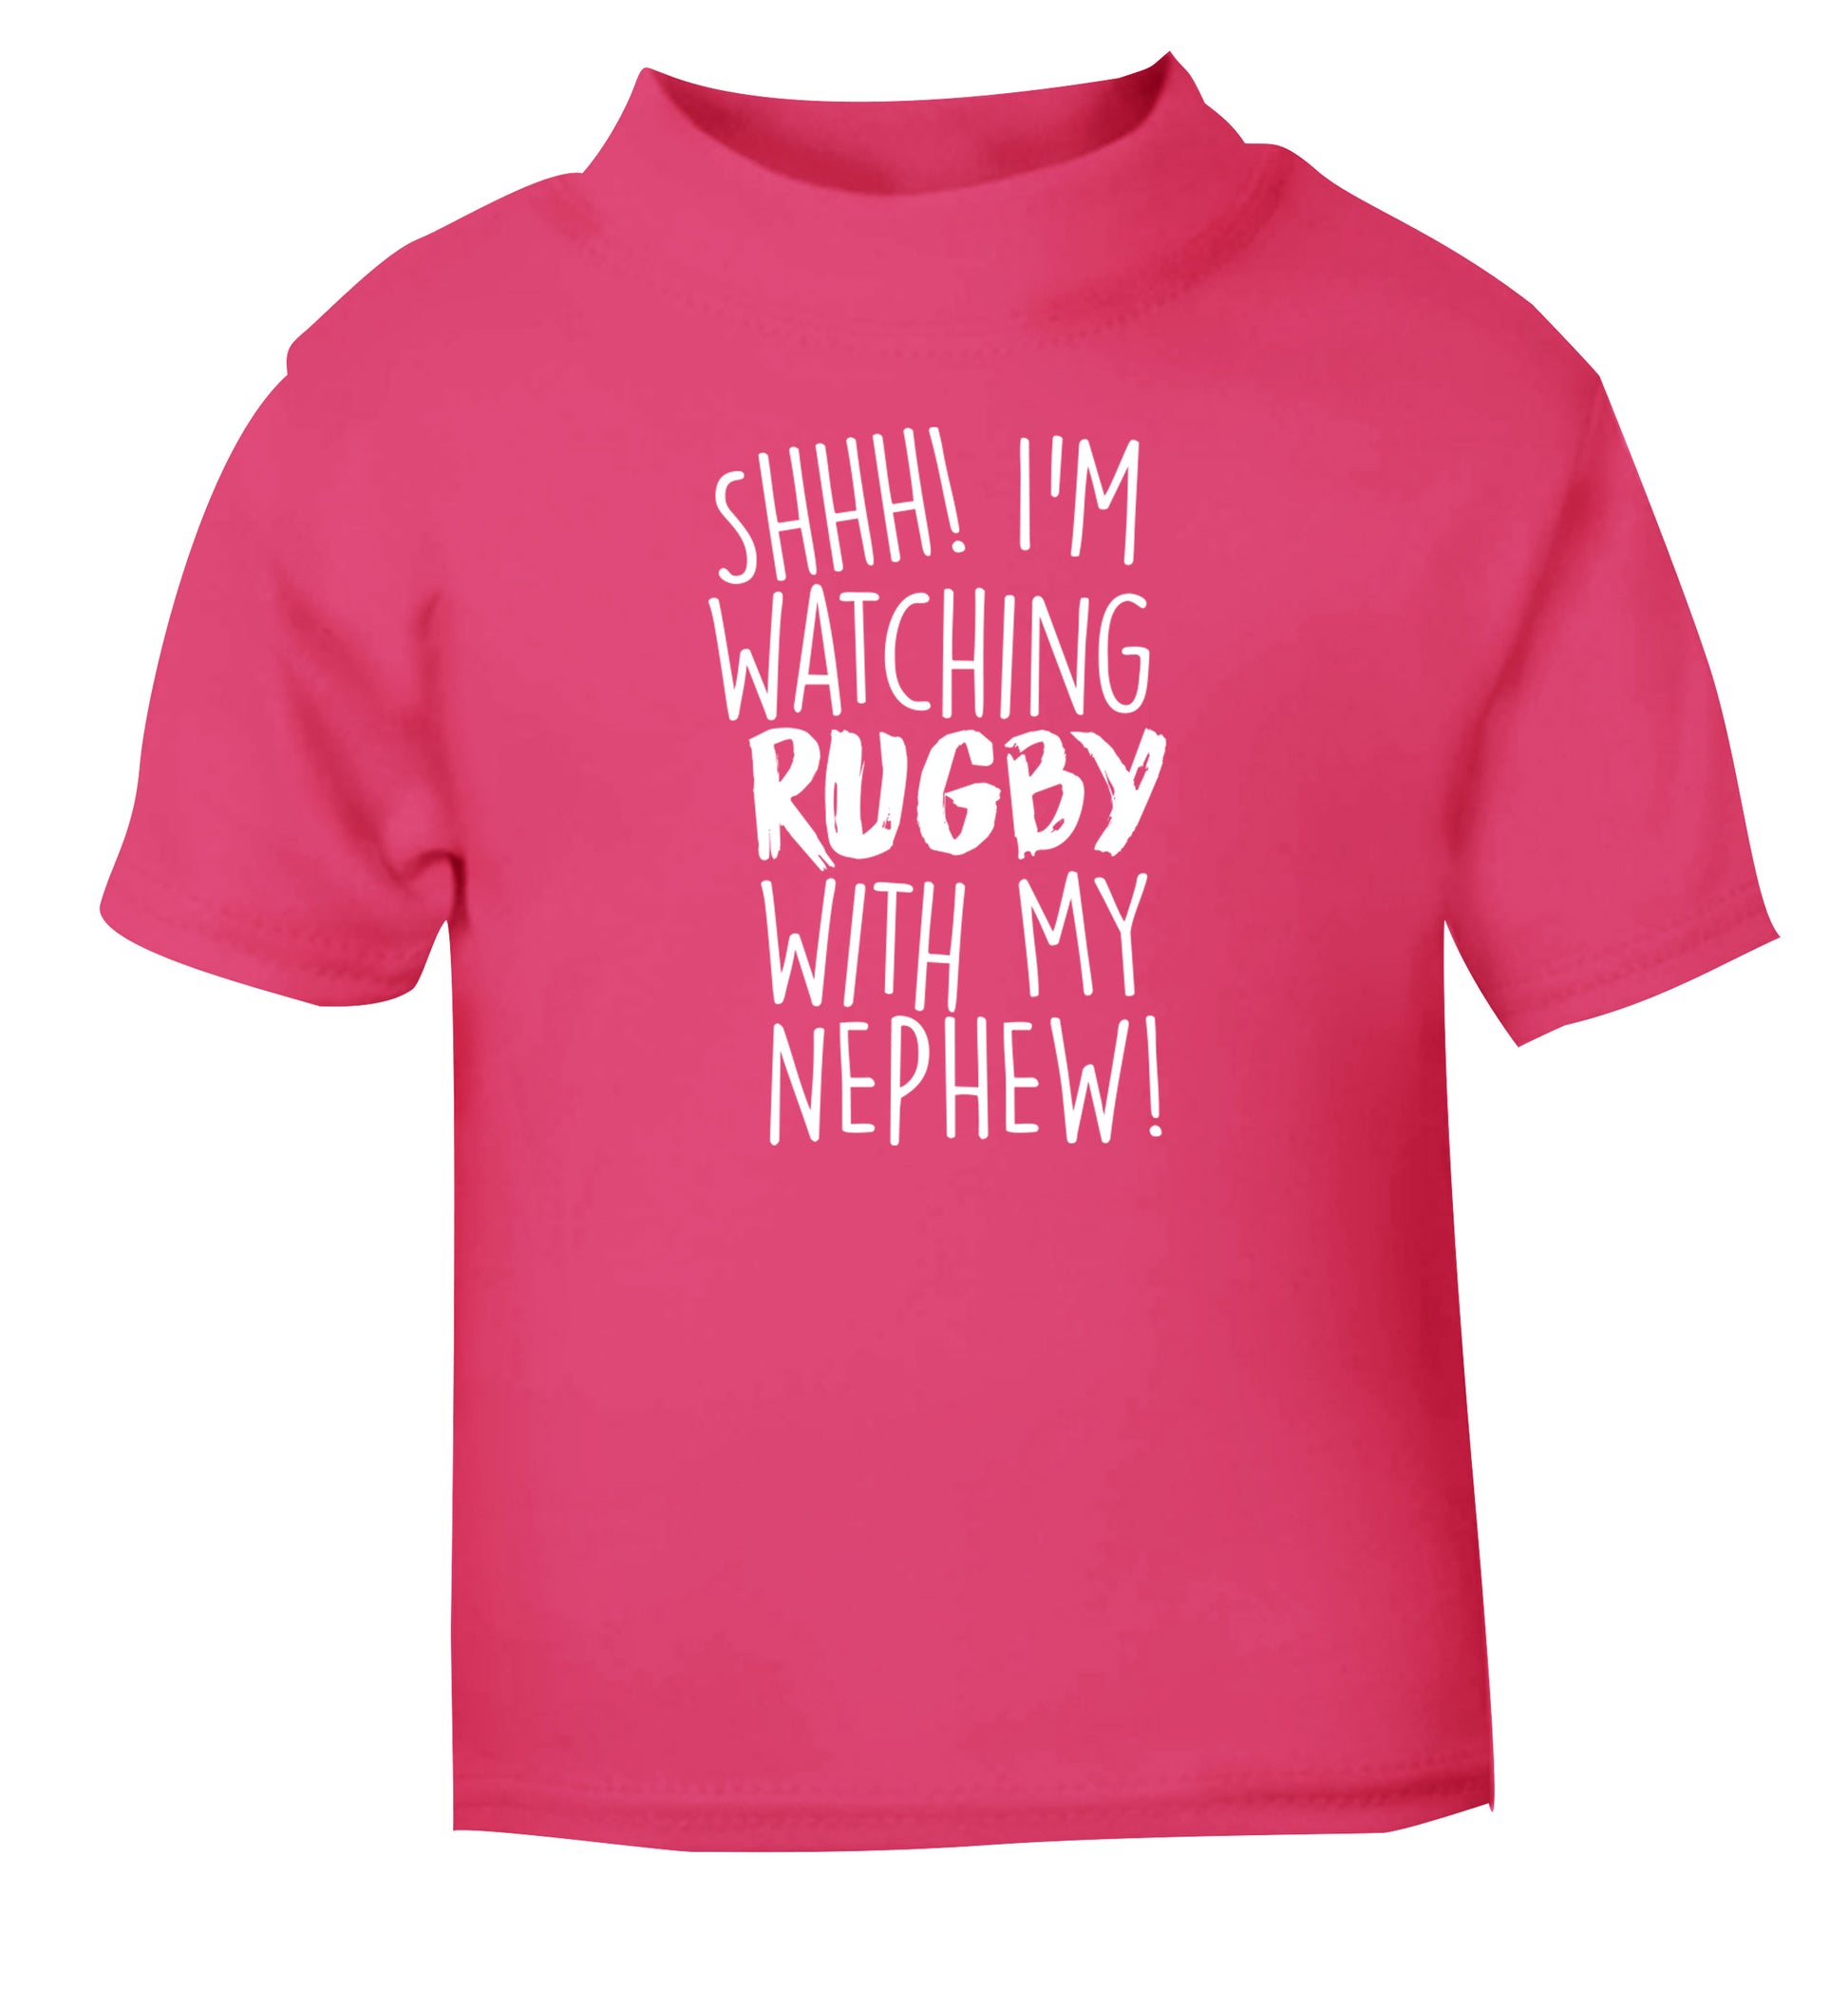 Shh.. I'm watching rugby with my nephew pink Baby Toddler Tshirt 2 Years